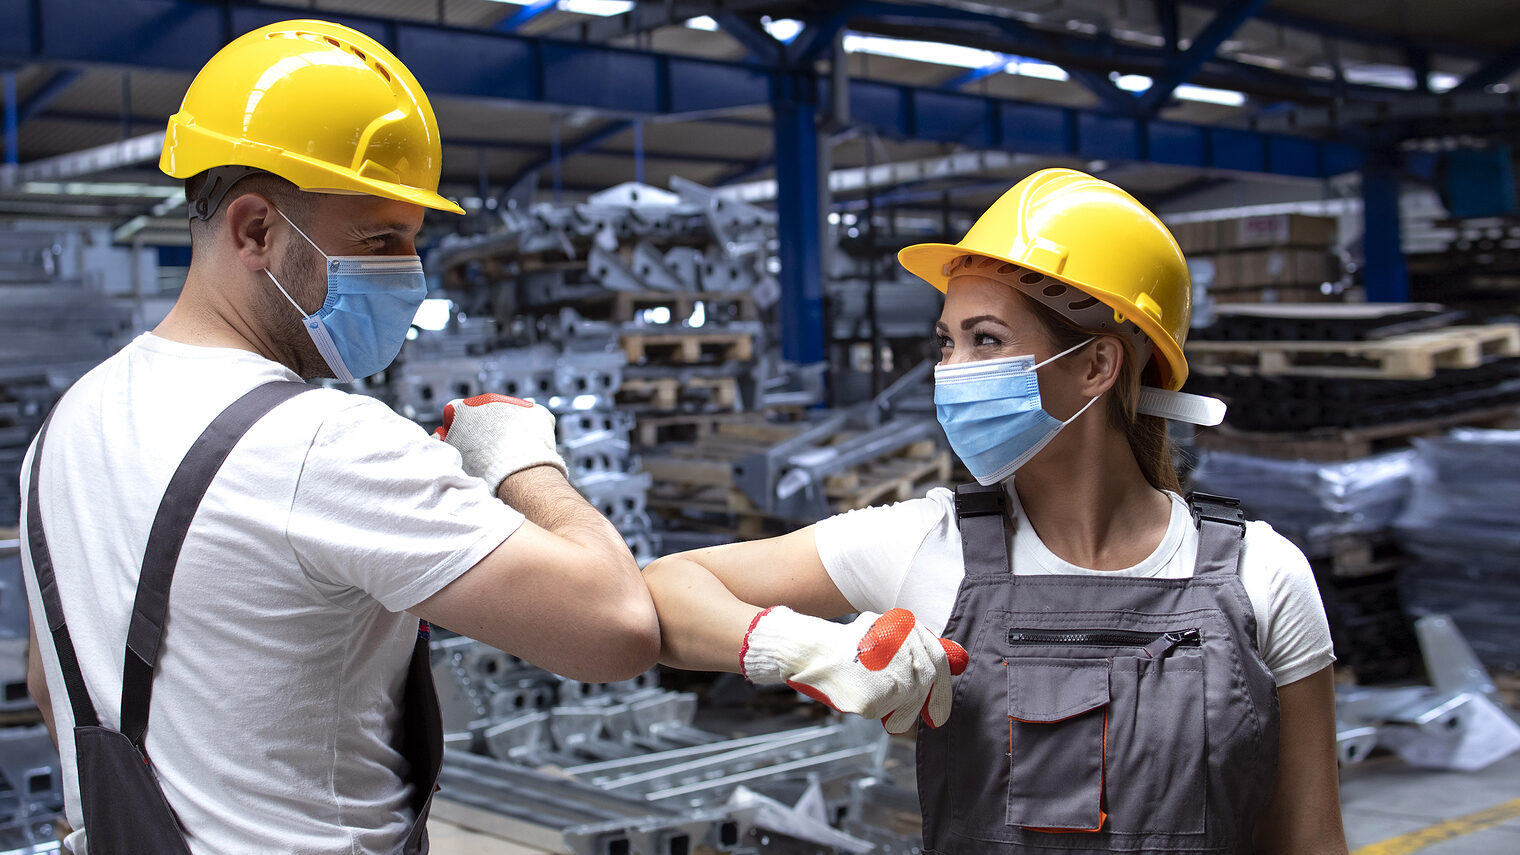 People working at factory touching with elbows and greeting due to corona virus and infection. Employees in factory wearing protection mask. Schlagwort(e): greeting, elbow, elbow greeting, elbow bump, supervisor, manager, worker, people, protection, mask, protection mask, hygienic, face mask, corona, virus, corona virus, COVID-19, prevention, precaution, disease, wearing, epidemic, pandemic, health, healthy, woman, work, industry, industrial, factory, plant, job, occupation, workman, uniform, helmet, hardhat, laborer, production, hall, technical, construction, engineering, business, indoors, working, foreman, manufacturing, engineer, safety measures